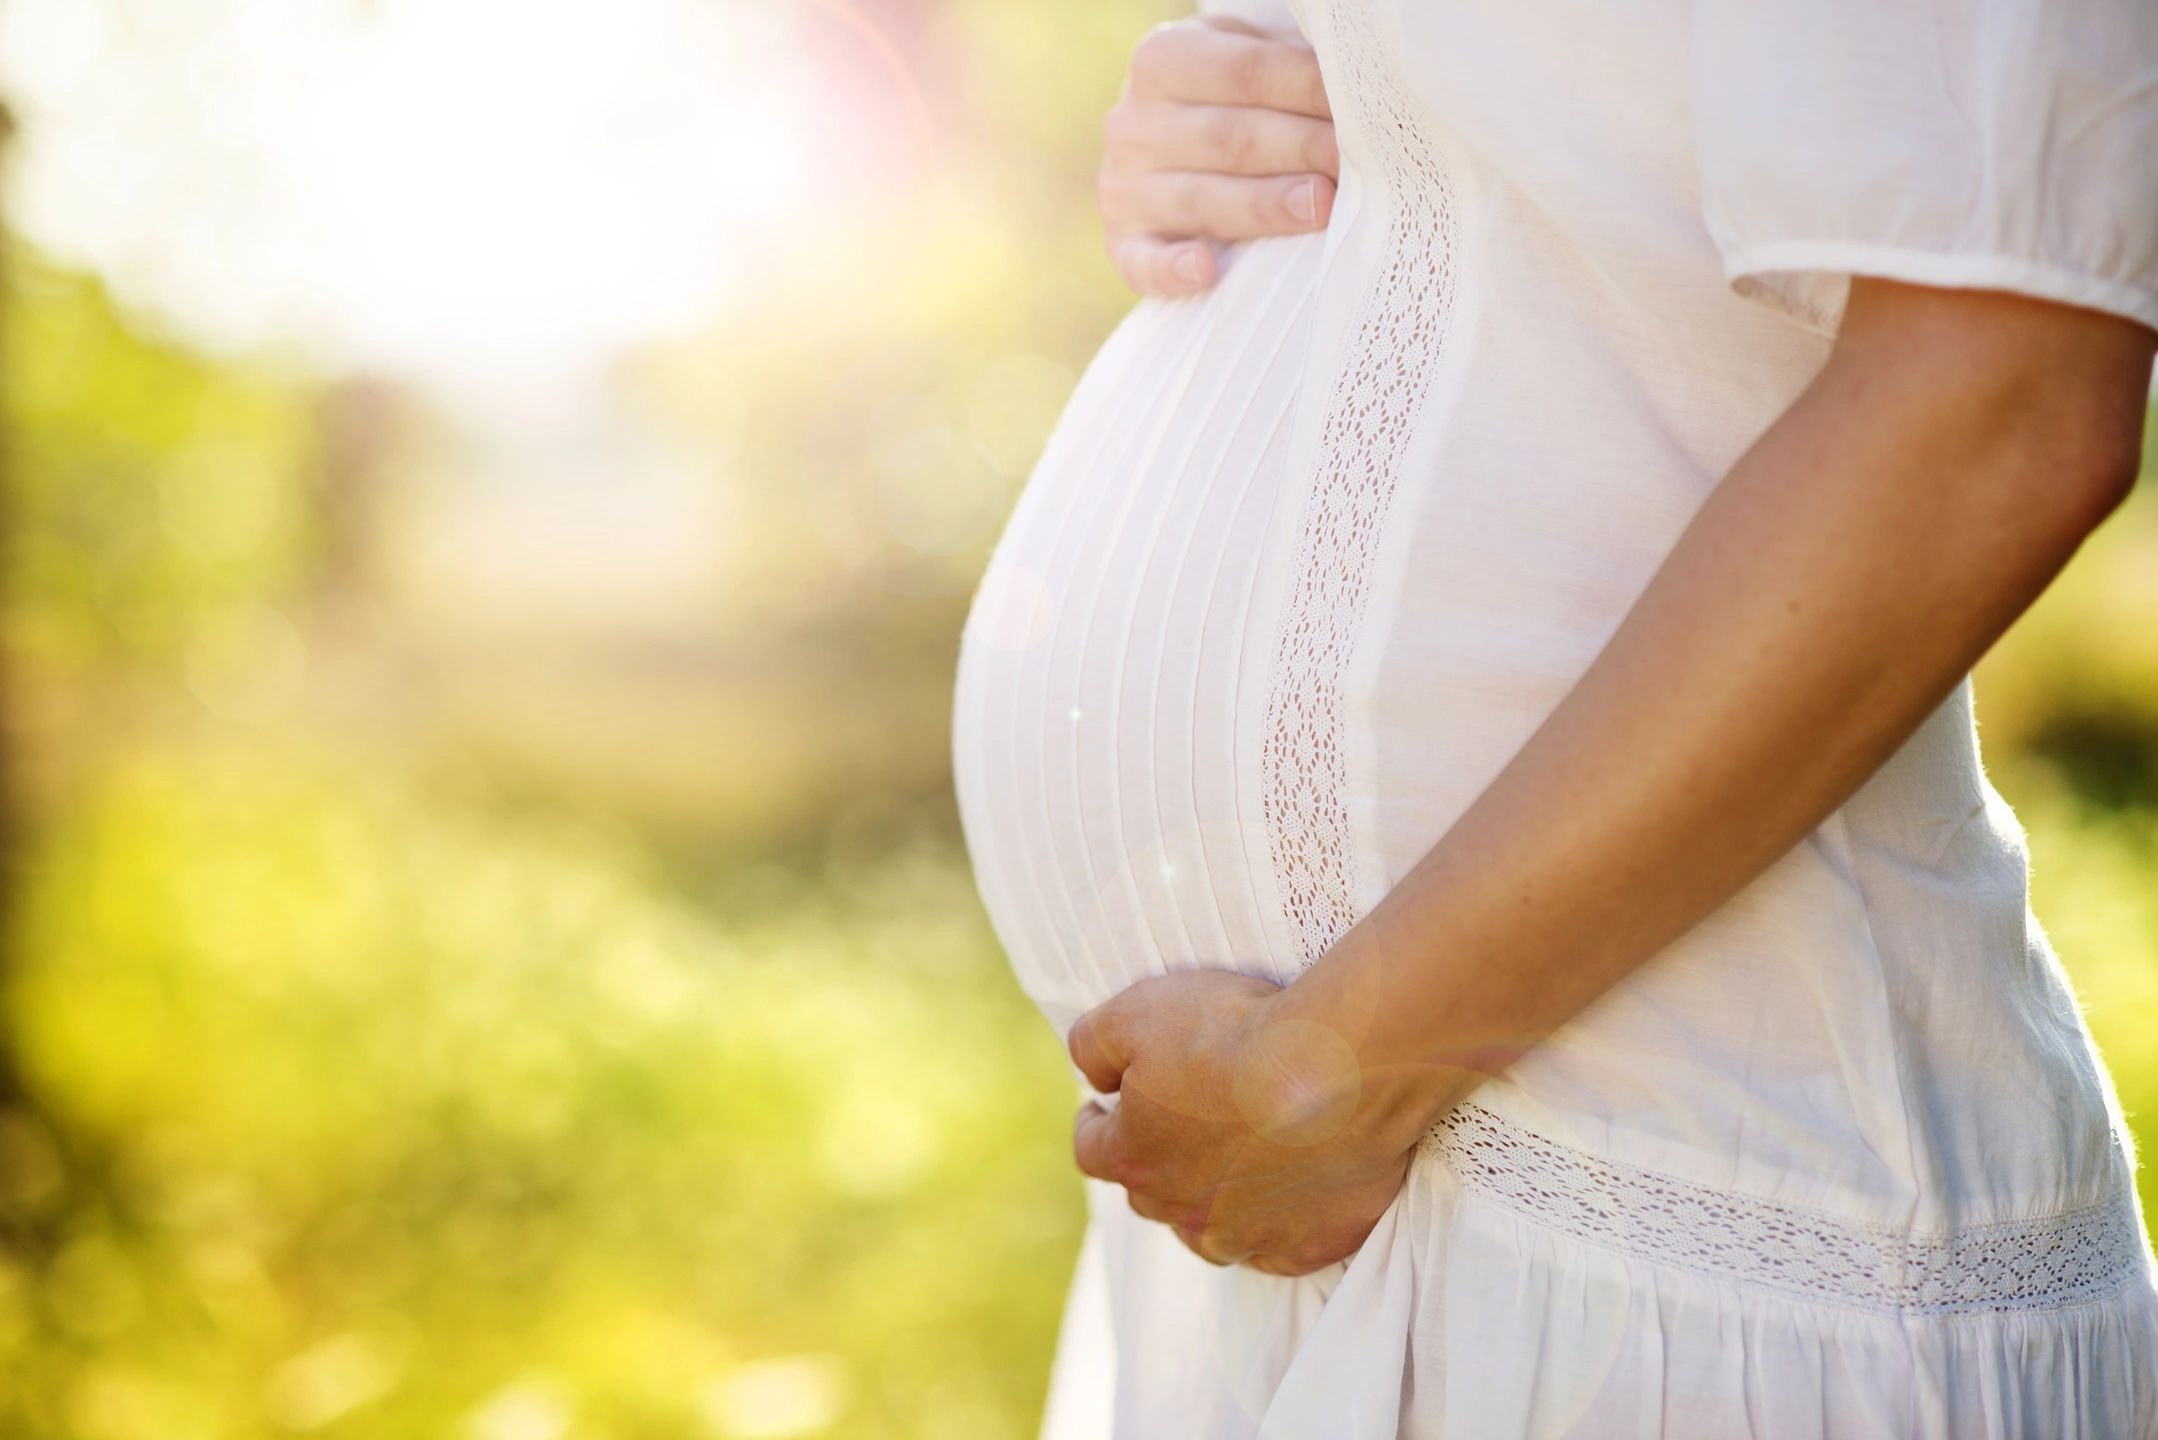 Pregnant woman stands in sunshine holding her belly